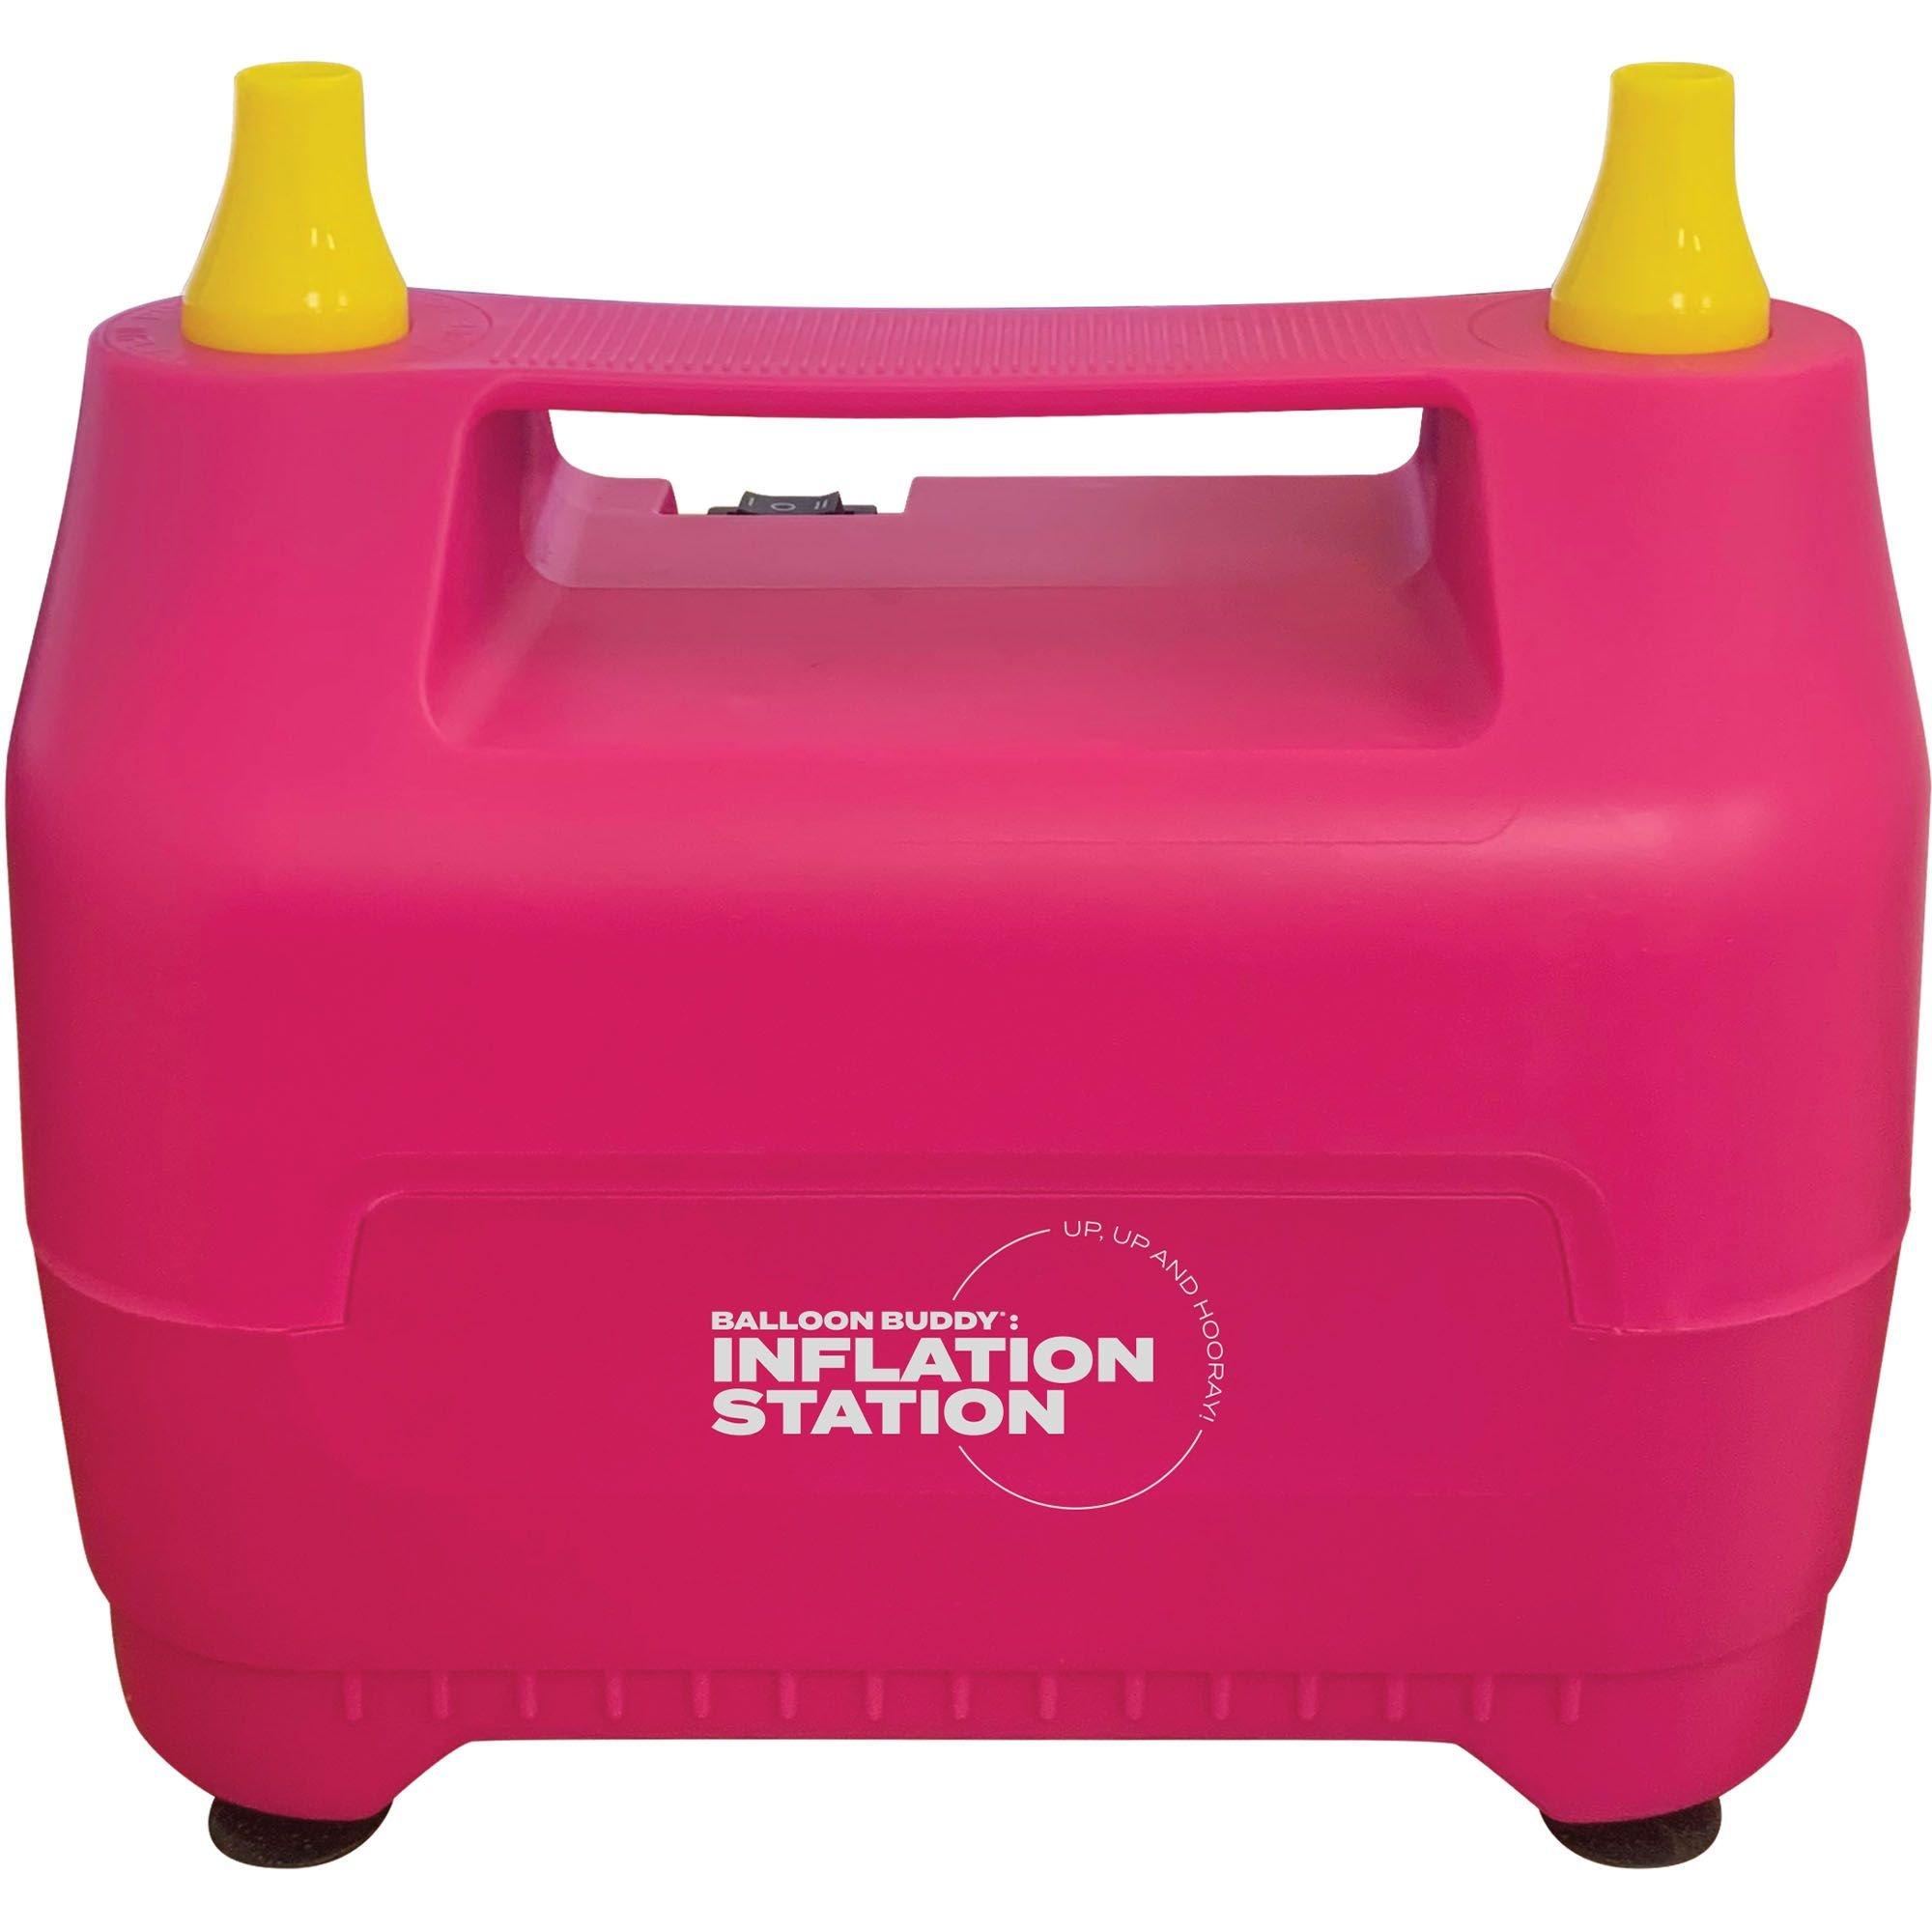 Dual Electric Balloon Pump, 7in x 8in - Balloon Buddy Inflation Station